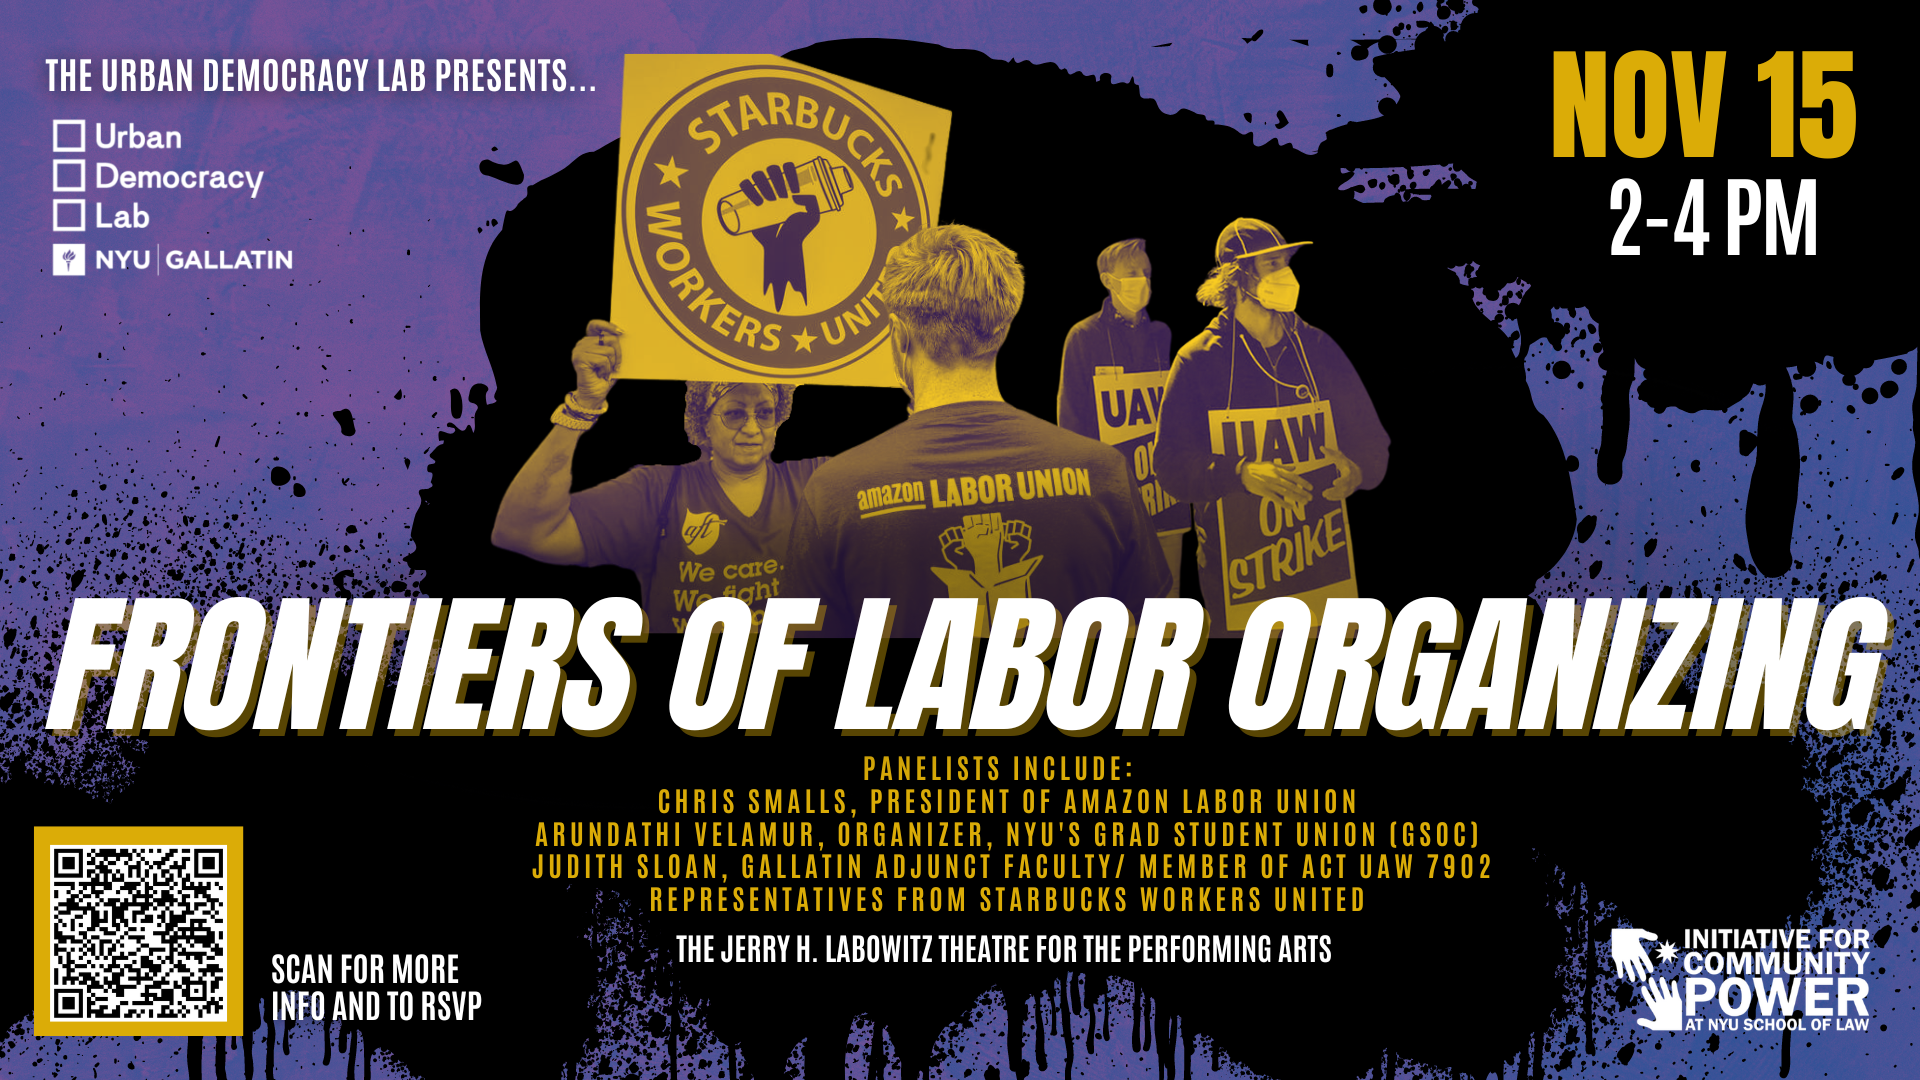 Collage of labor organizers in yellow over purple background with titles frontiers of labor organizing in middle